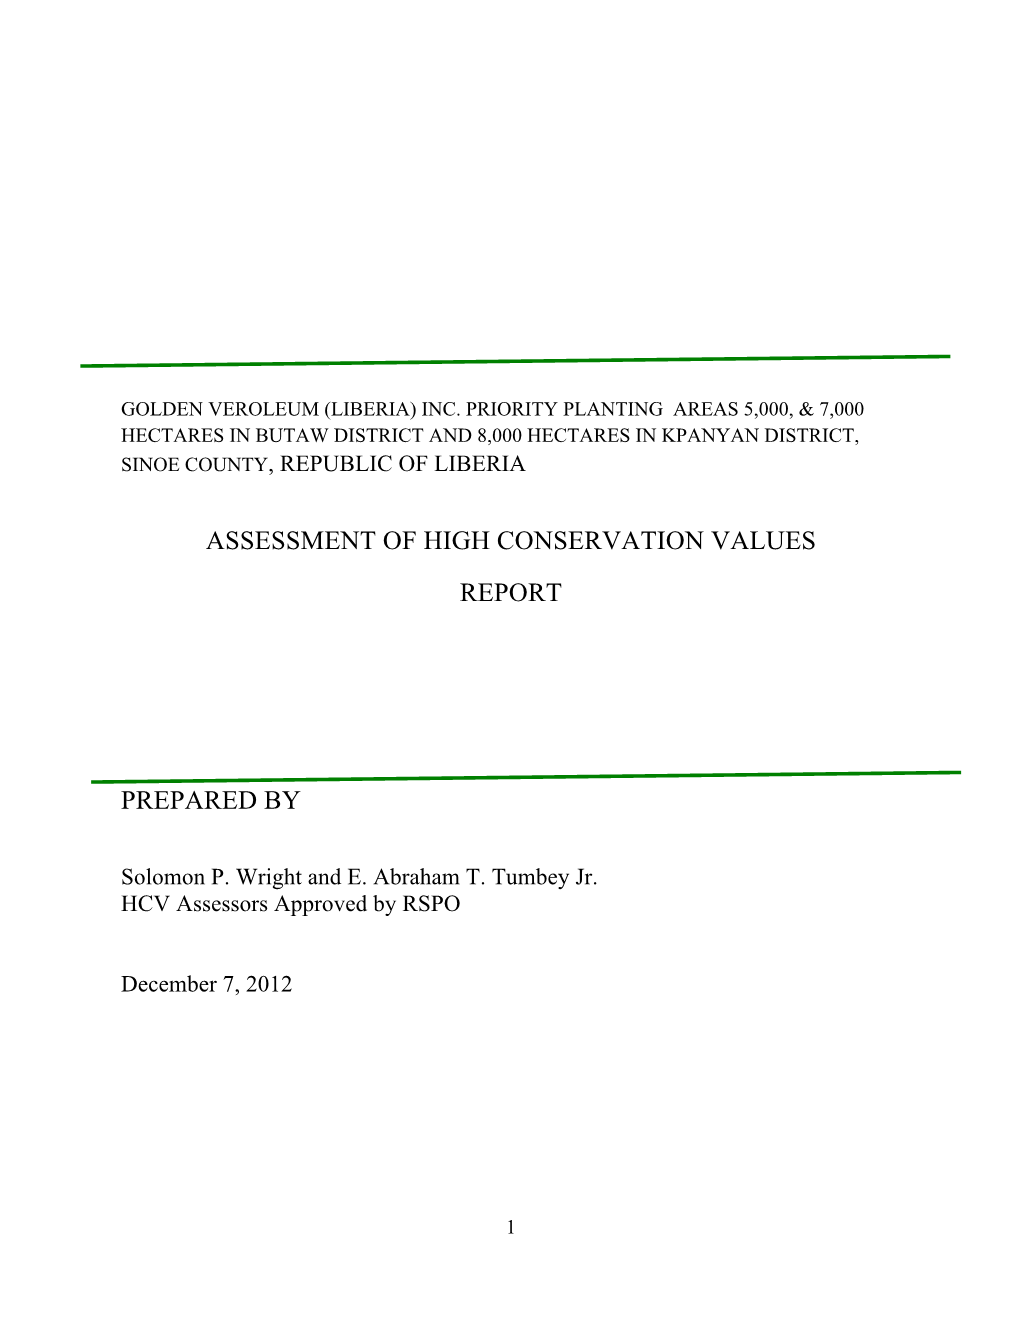 Assessment of High Conservation Values Report